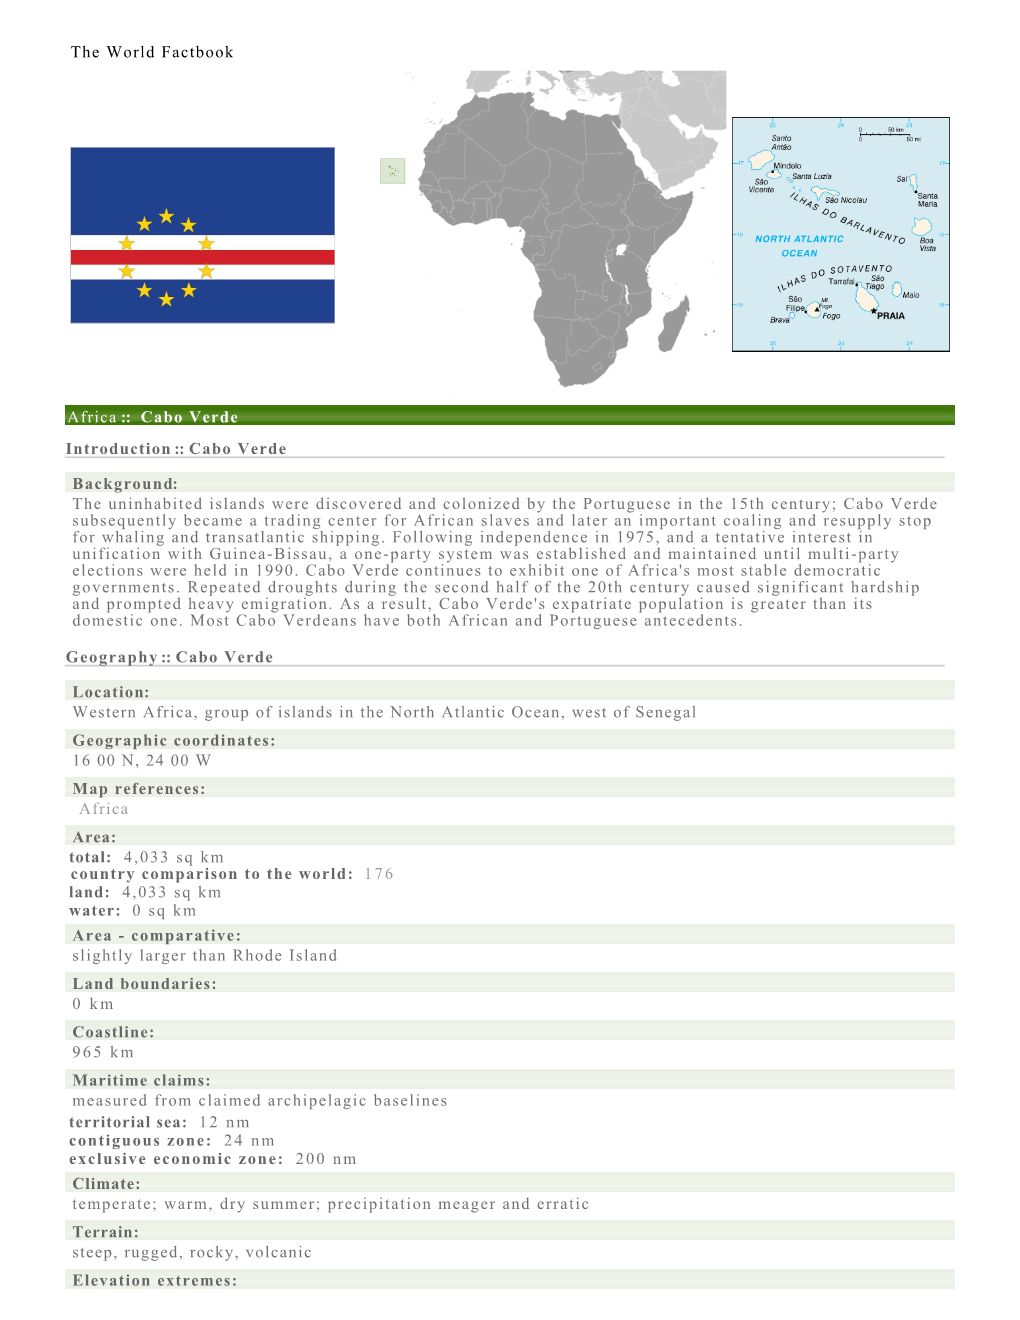 The World Factbook Africa :: Cabo Verde Introduction :: Cabo Verde